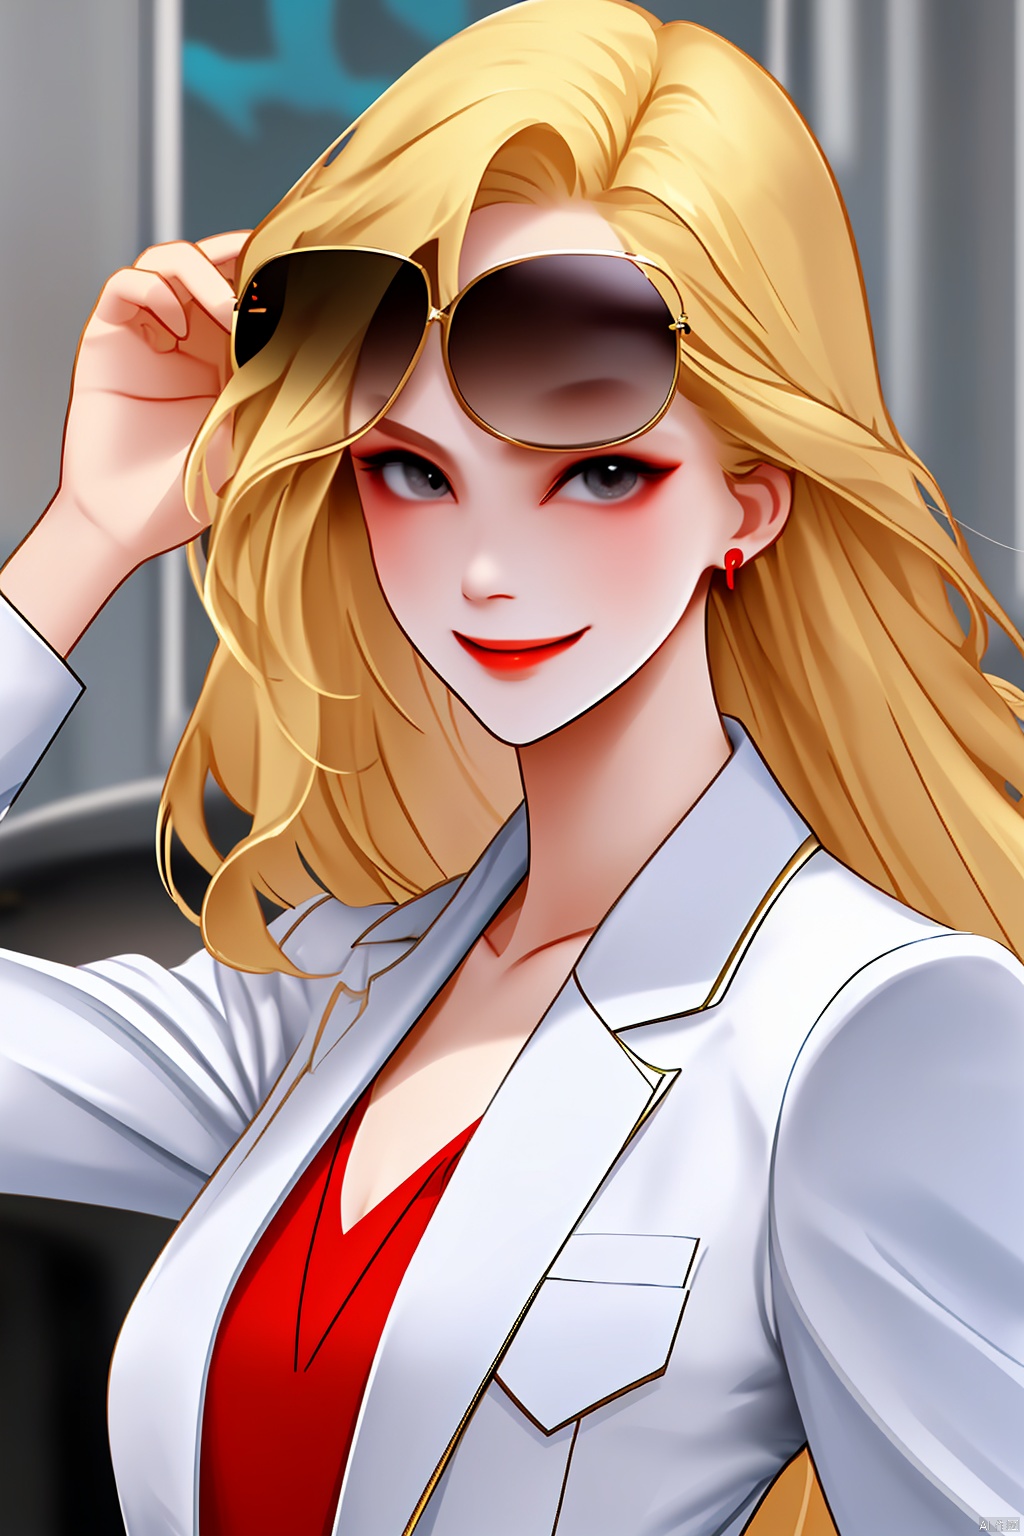 blonde hair, sunglass, pocket, white suits, red tie, smile, anger, look at viewer, rounded shoulders, woman